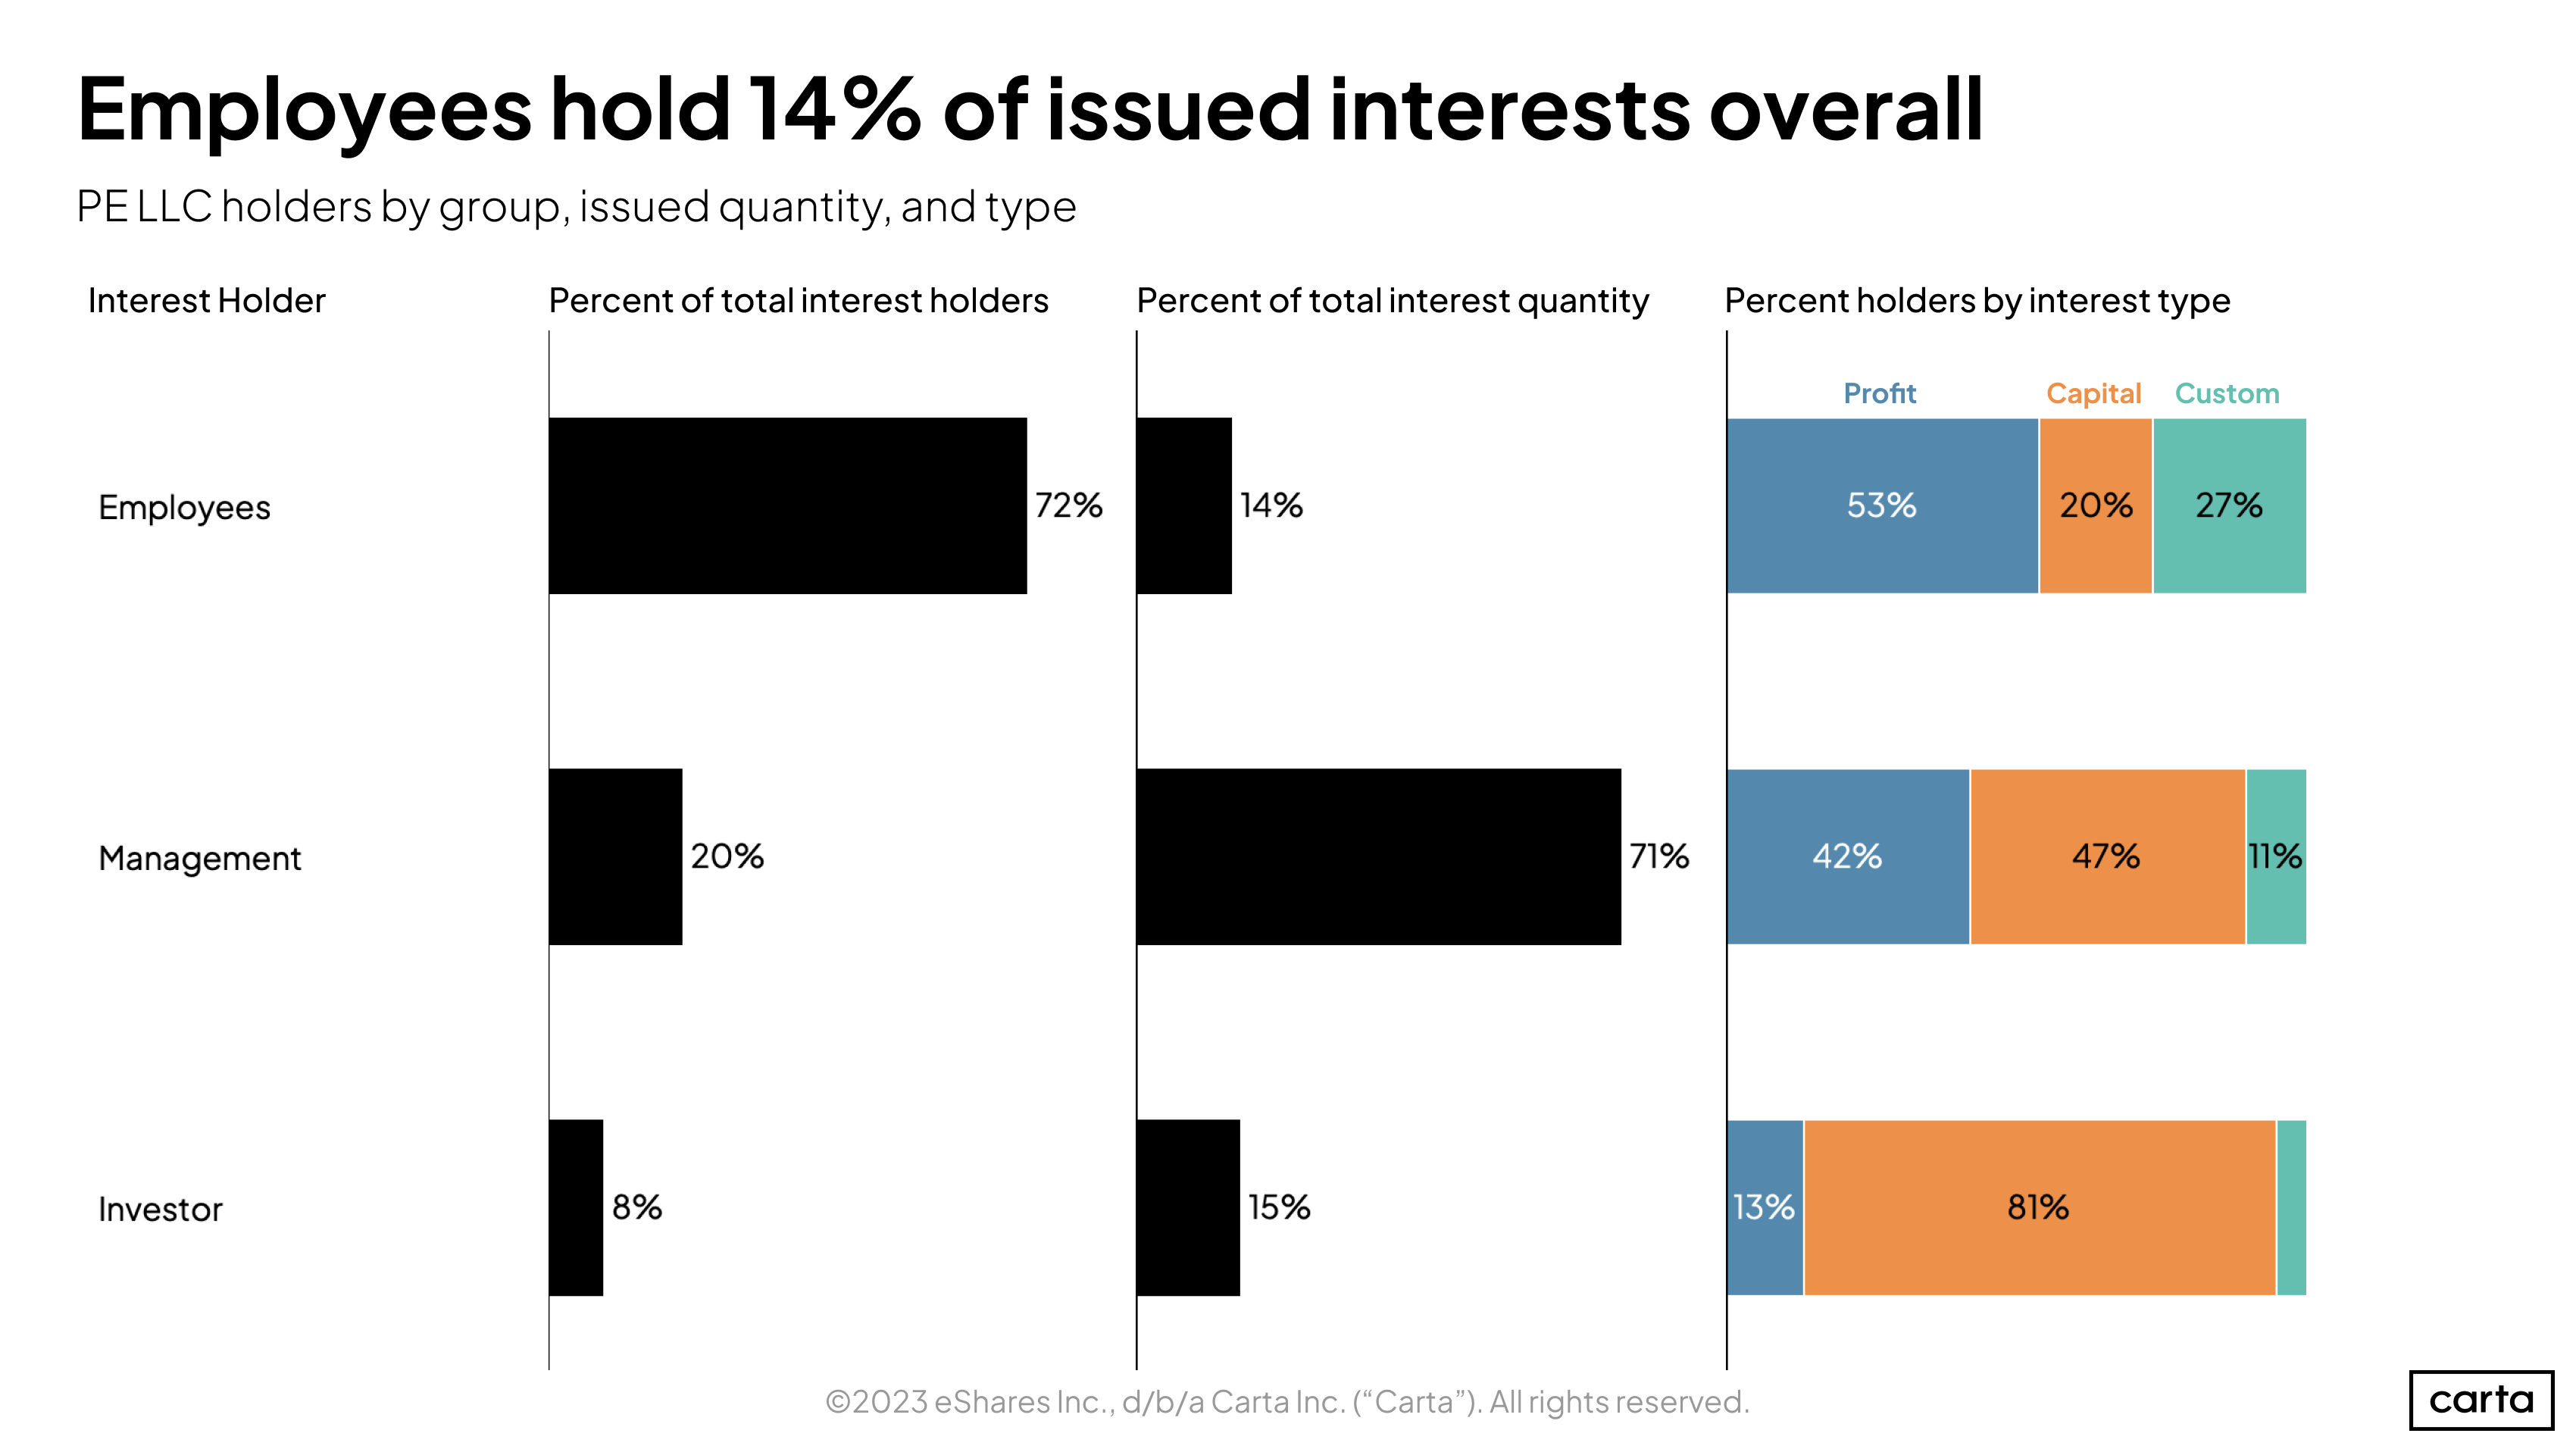 Employees hold 14% of issued interests overall